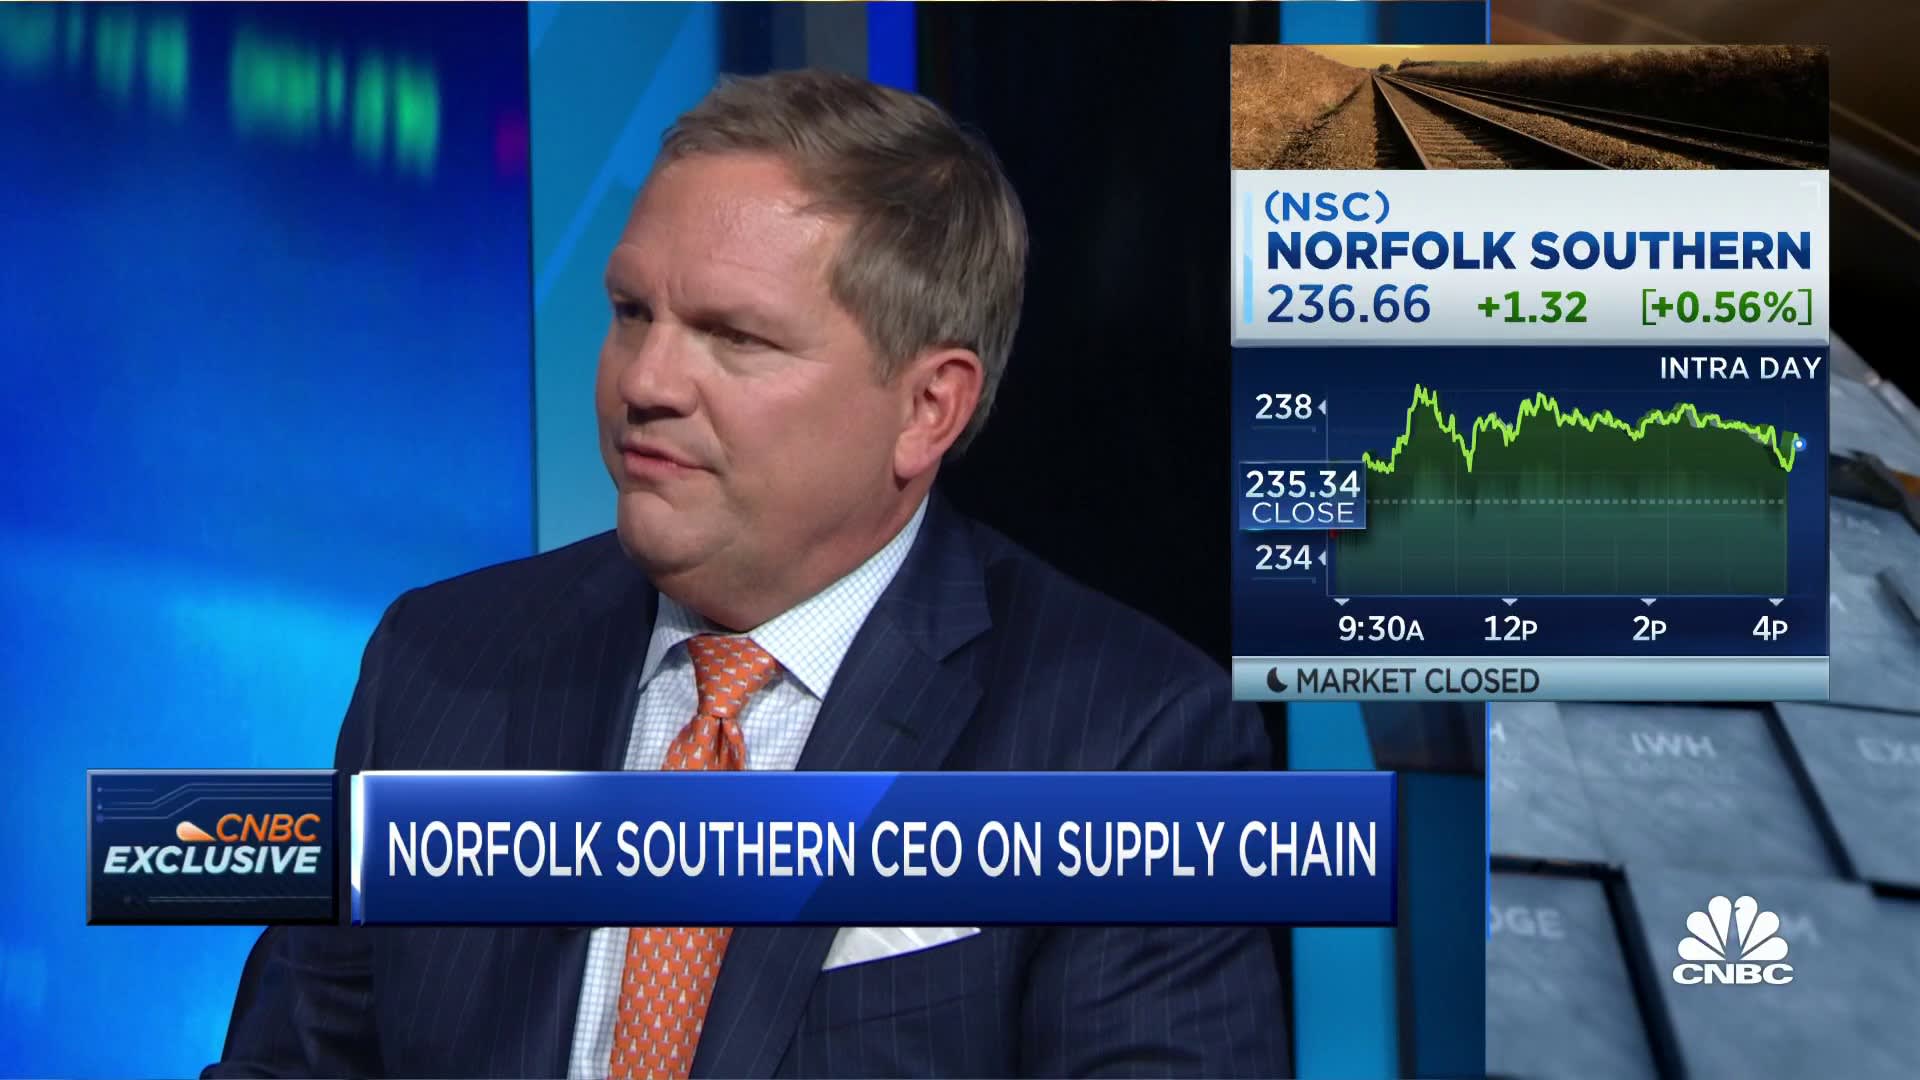 Watch CNBC’s full interview with Norfolk Southern CEO Alan Shaw on derailment charge and supply chain